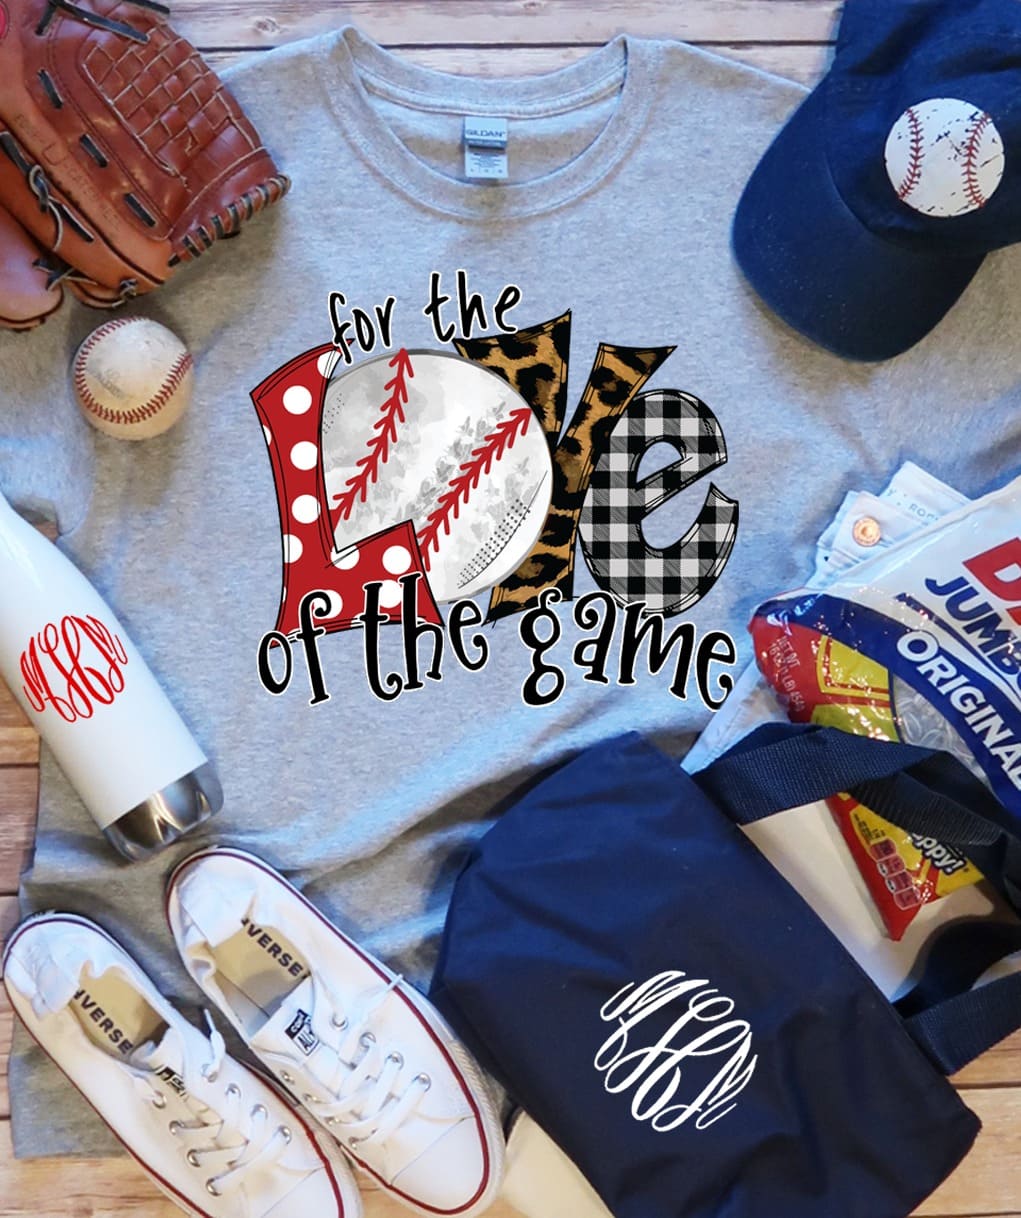 For the love of the game - Love baseball game, baseball player T-shirt